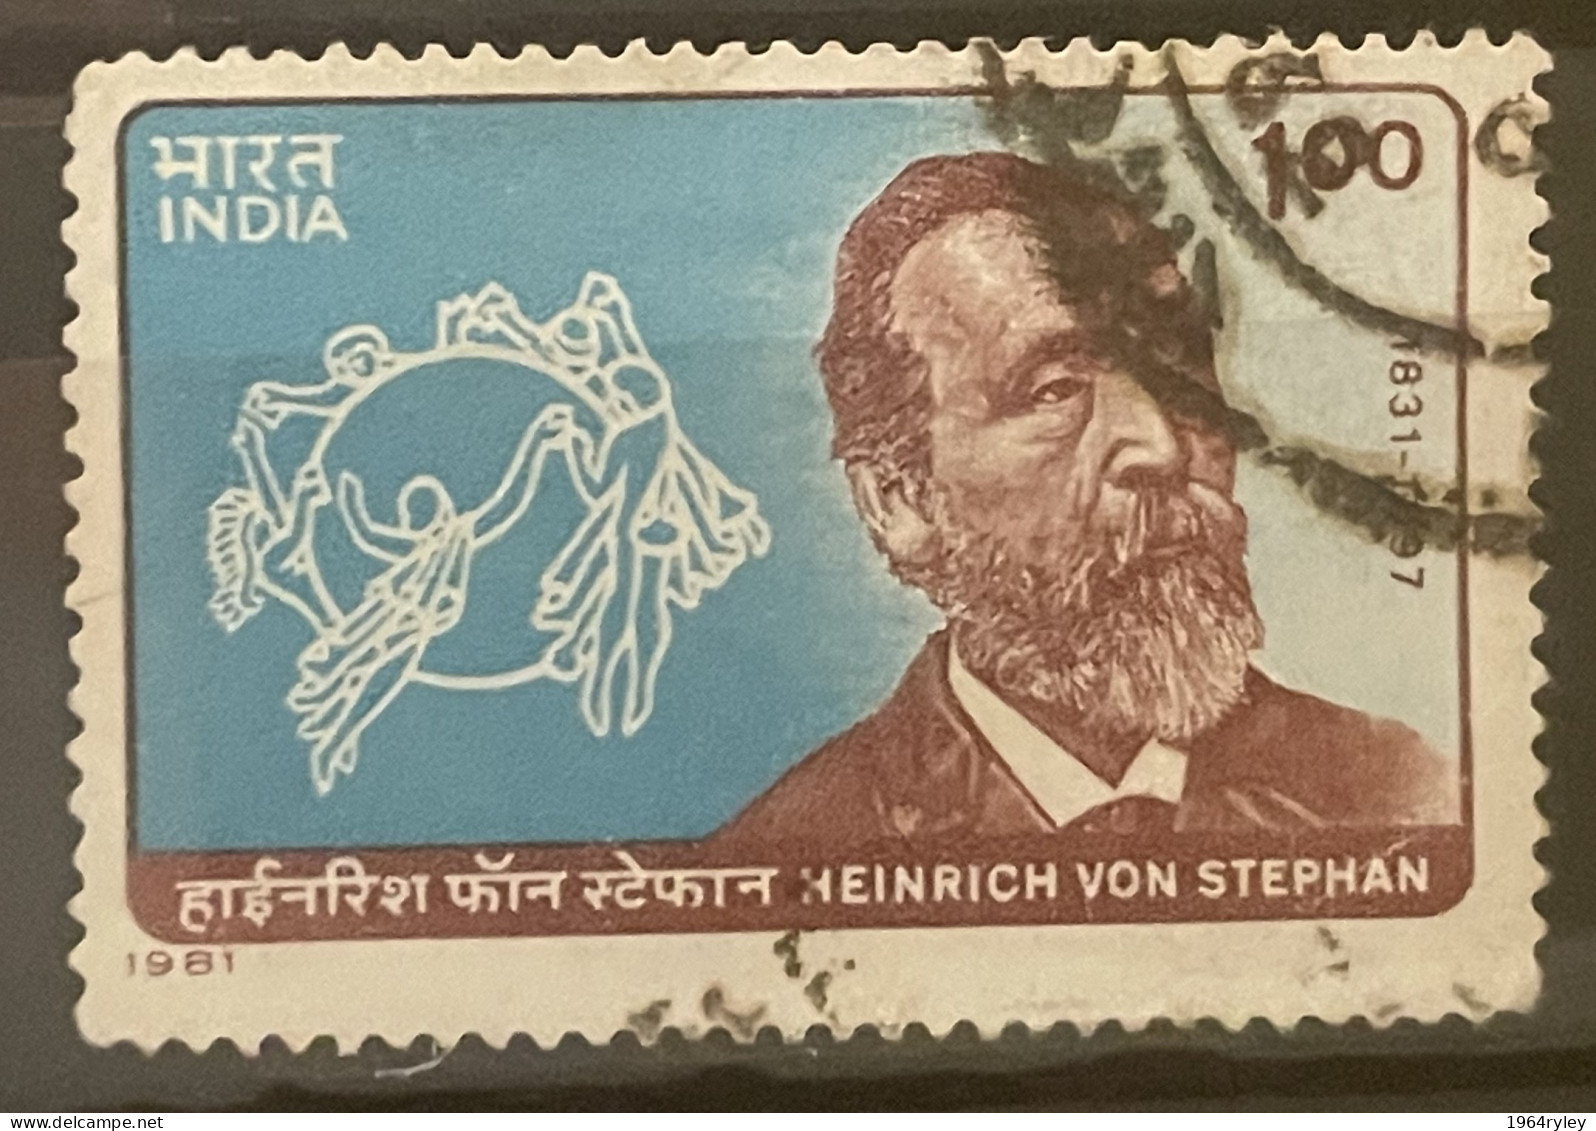 INDIA - (0) - 1981  #  865    SEE PHOTO FOR CONDITION OF STAMP(S) - Gebruikt